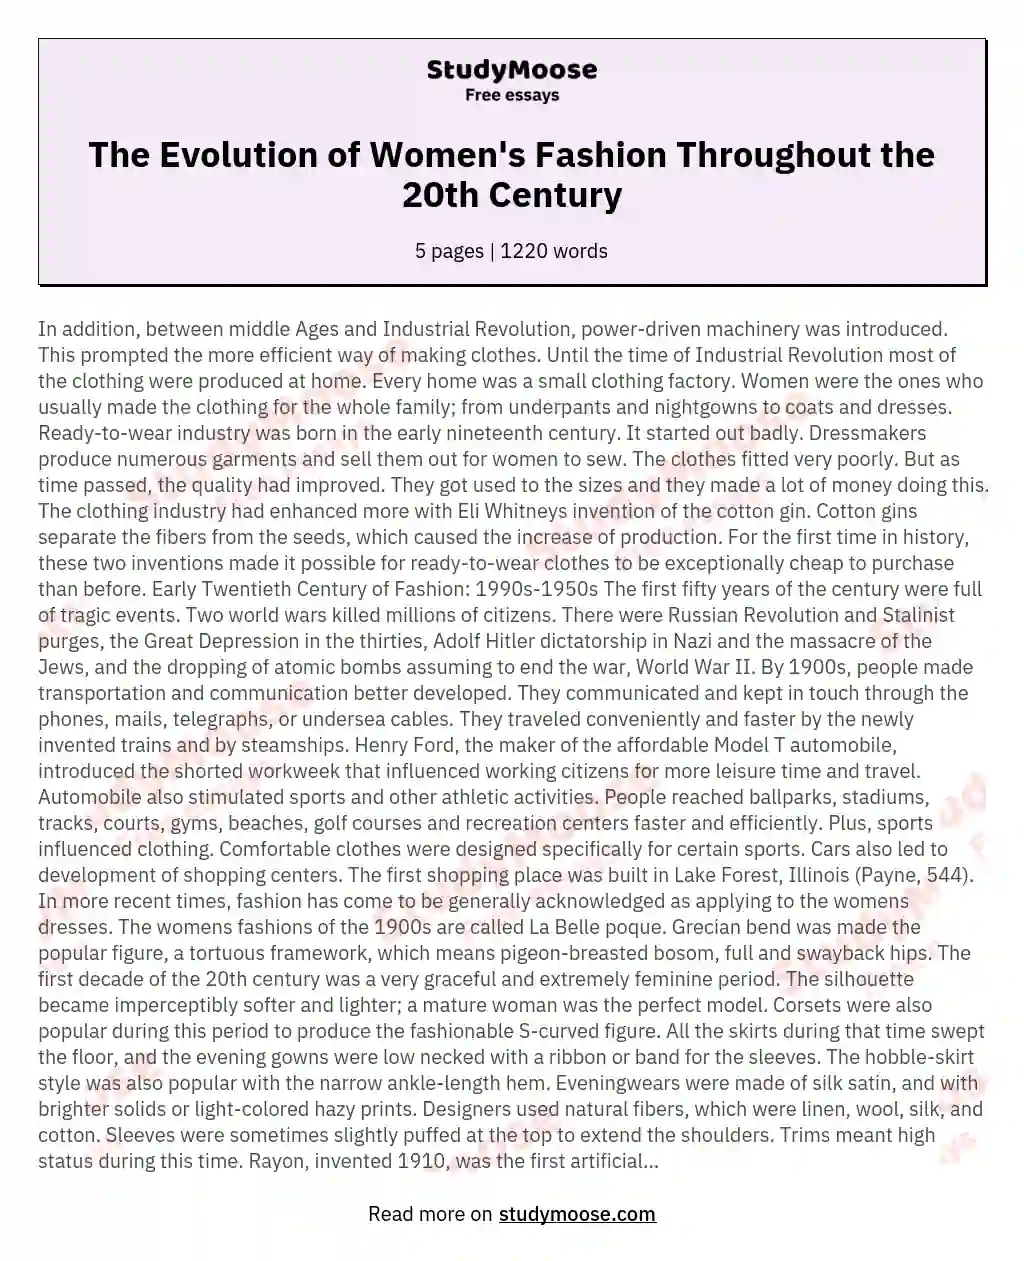 The Evolution of Women's Fashion Throughout the 20th Century essay